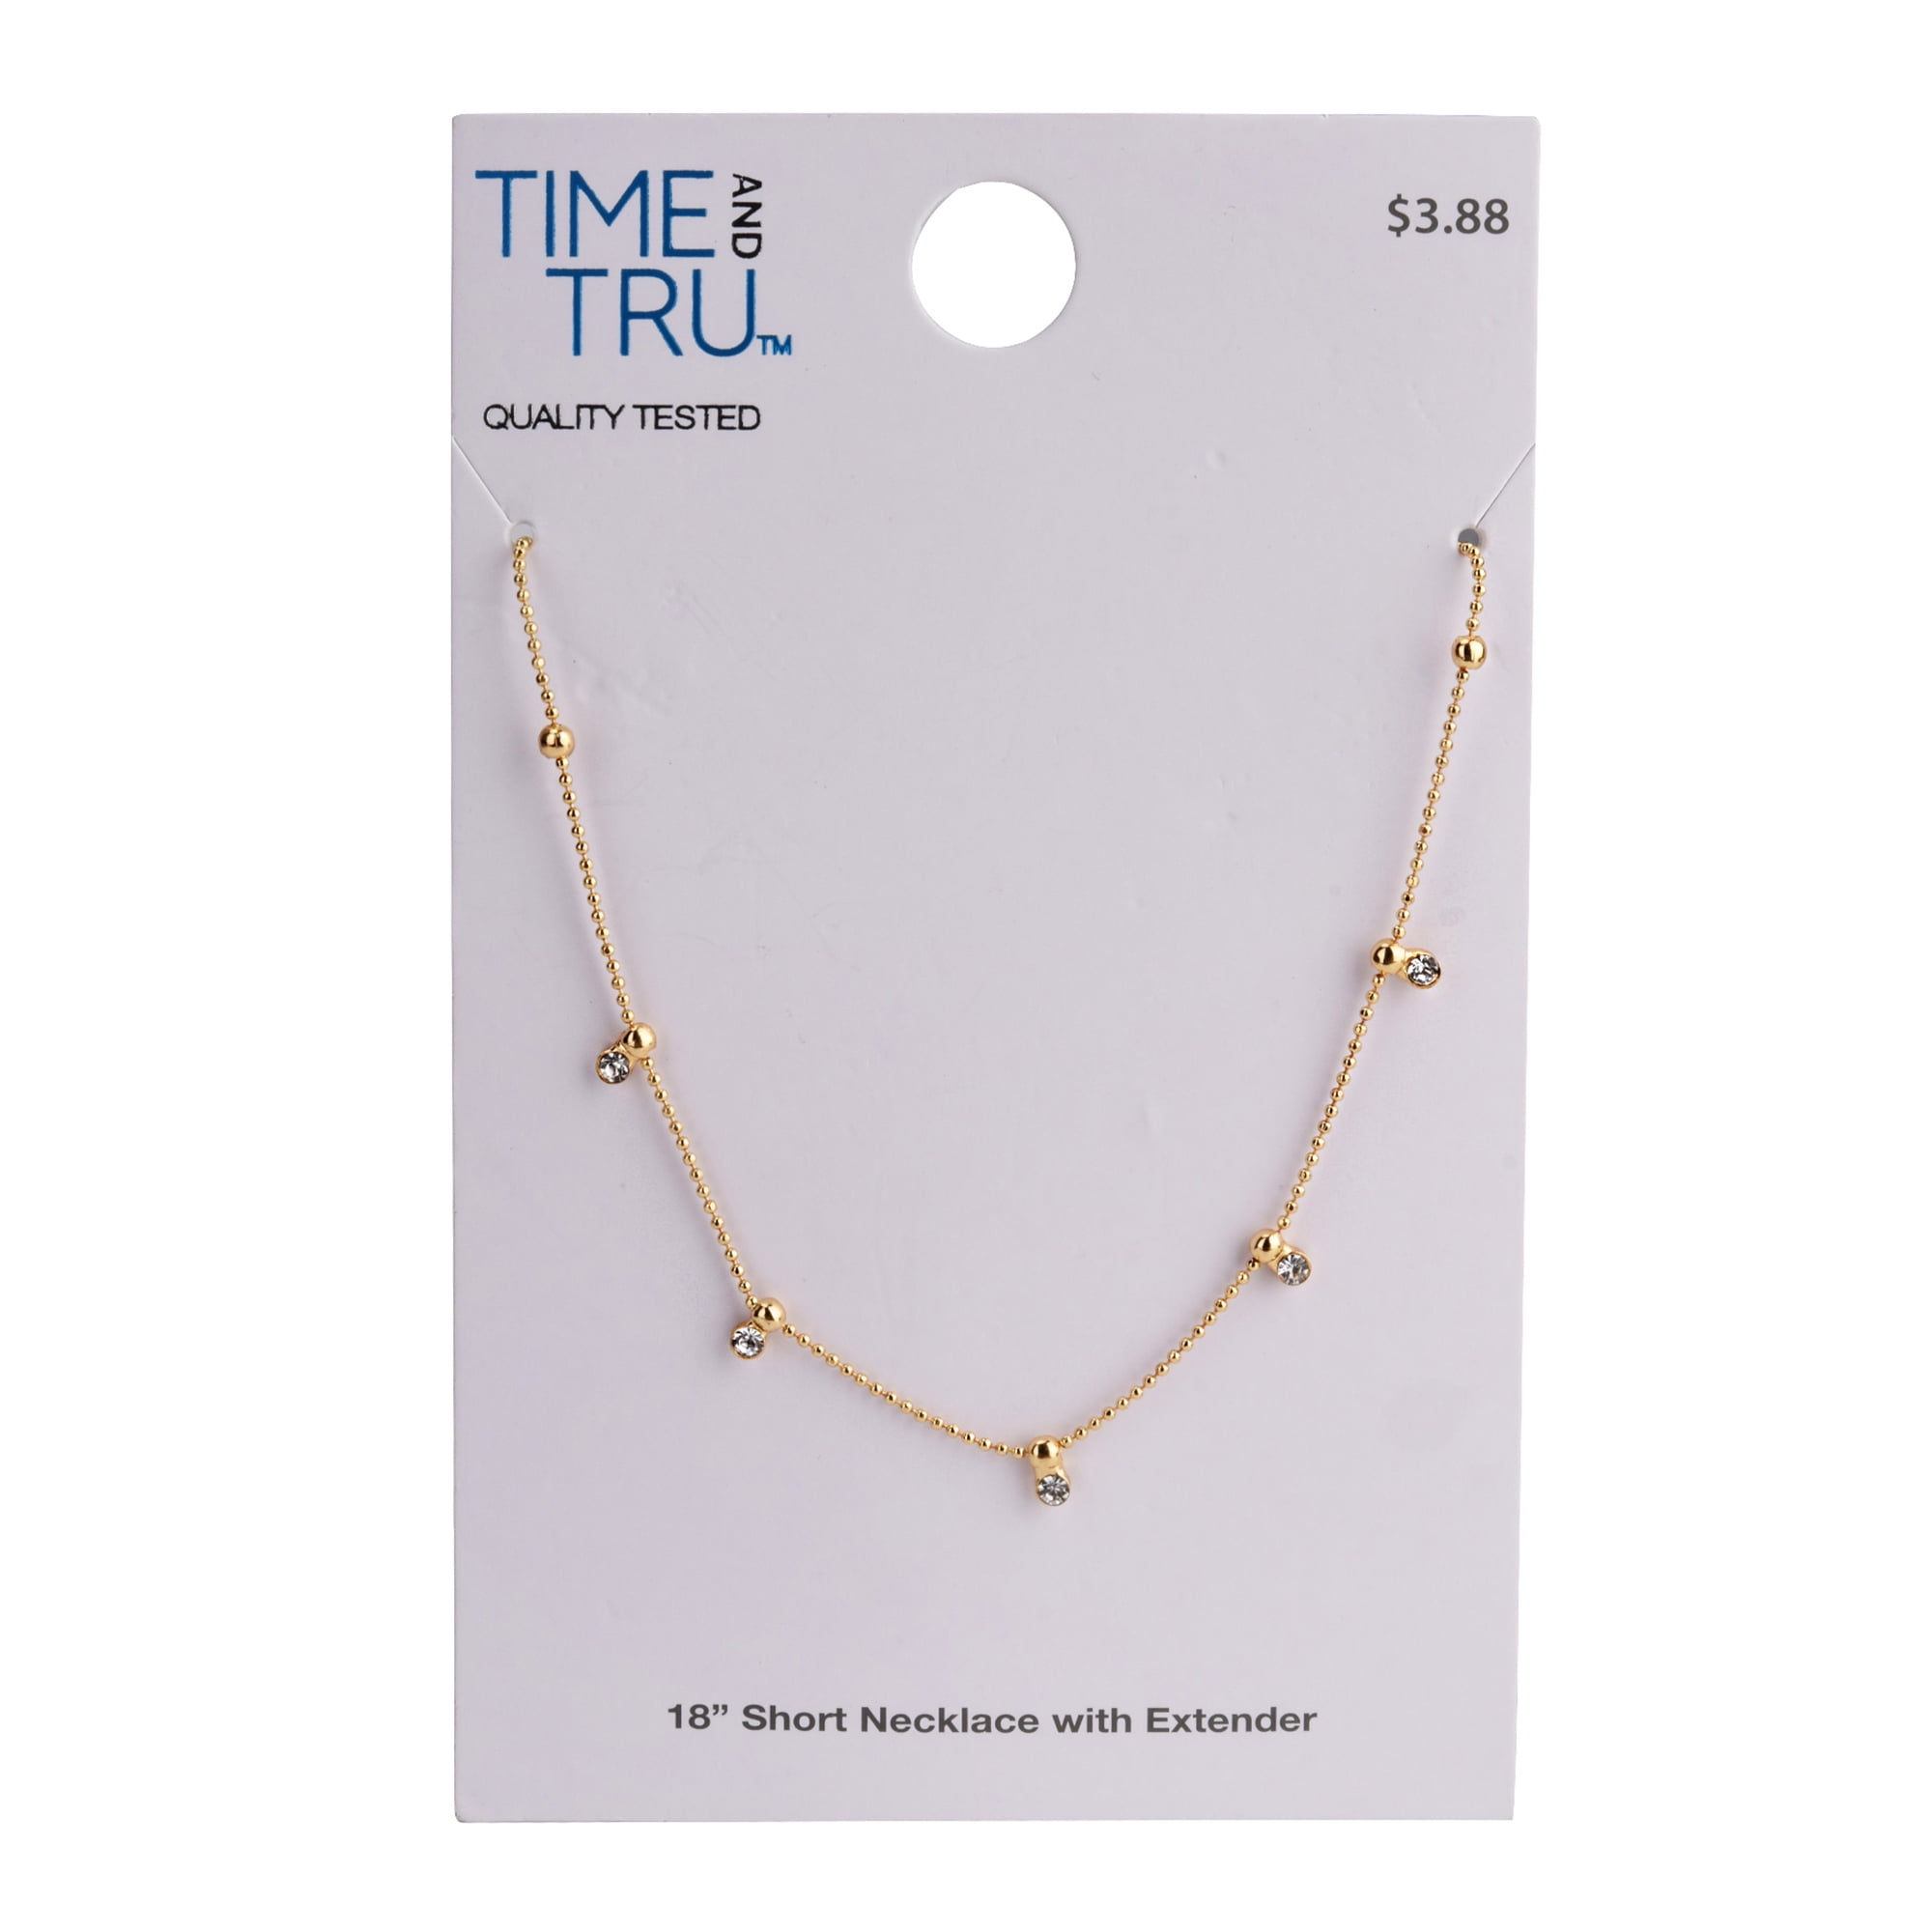 Time And Tru Women's Gold Tone Crystal Dangle Delicate Necklace